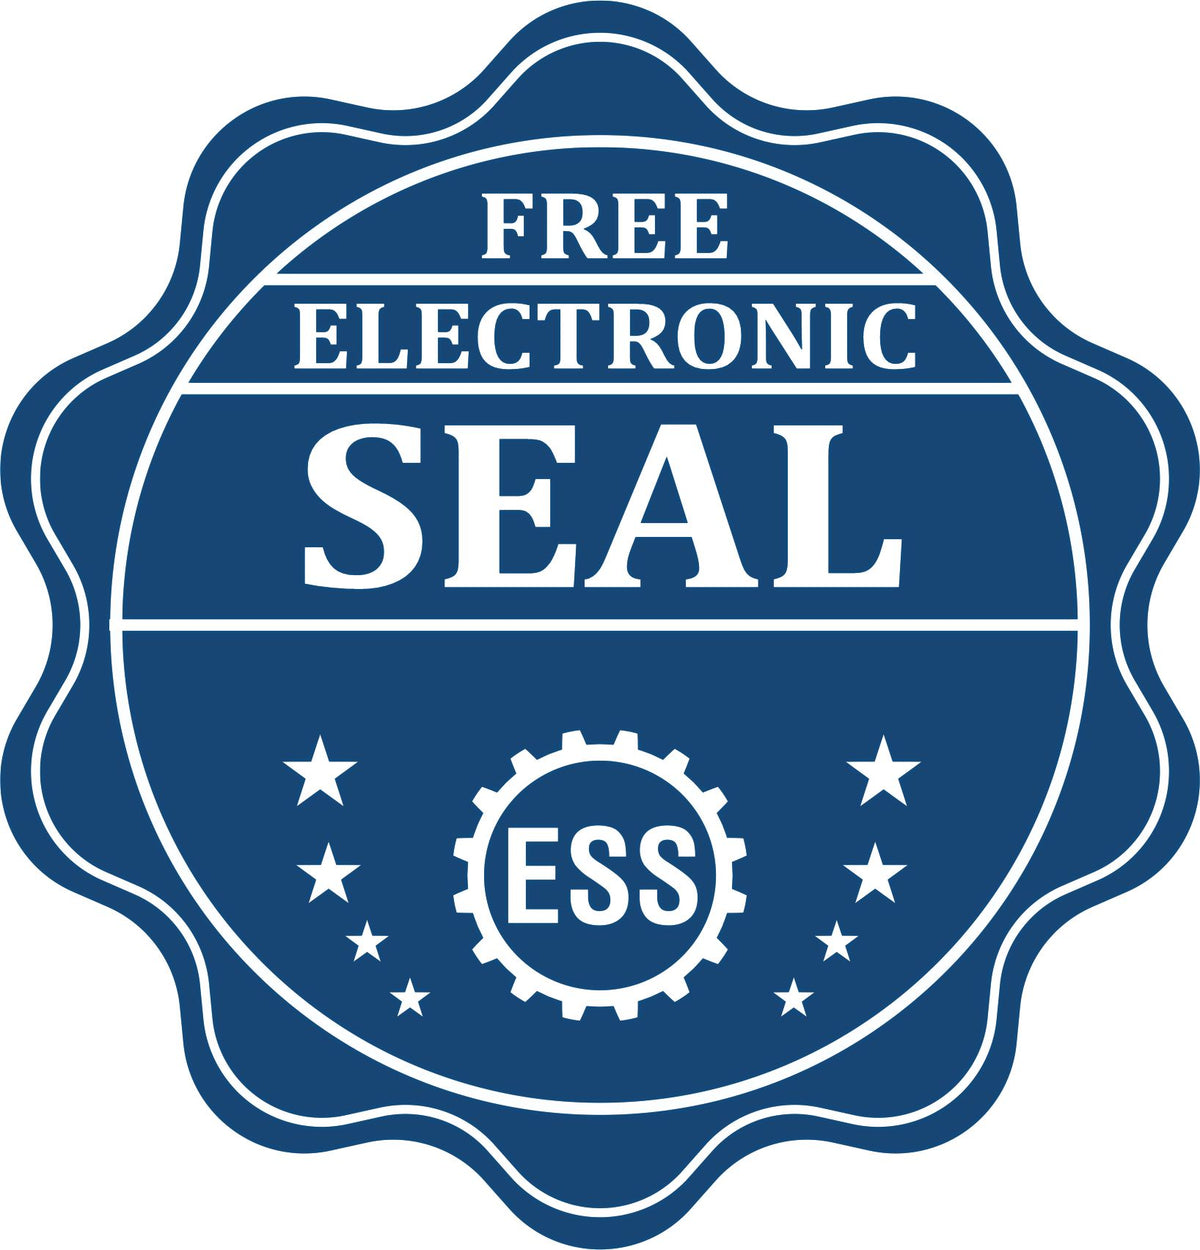 A badge showing a free electronic seal for the Heavy Duty Cast Iron Iowa Architect Embosser with stars and the ESS gear on the emblem.